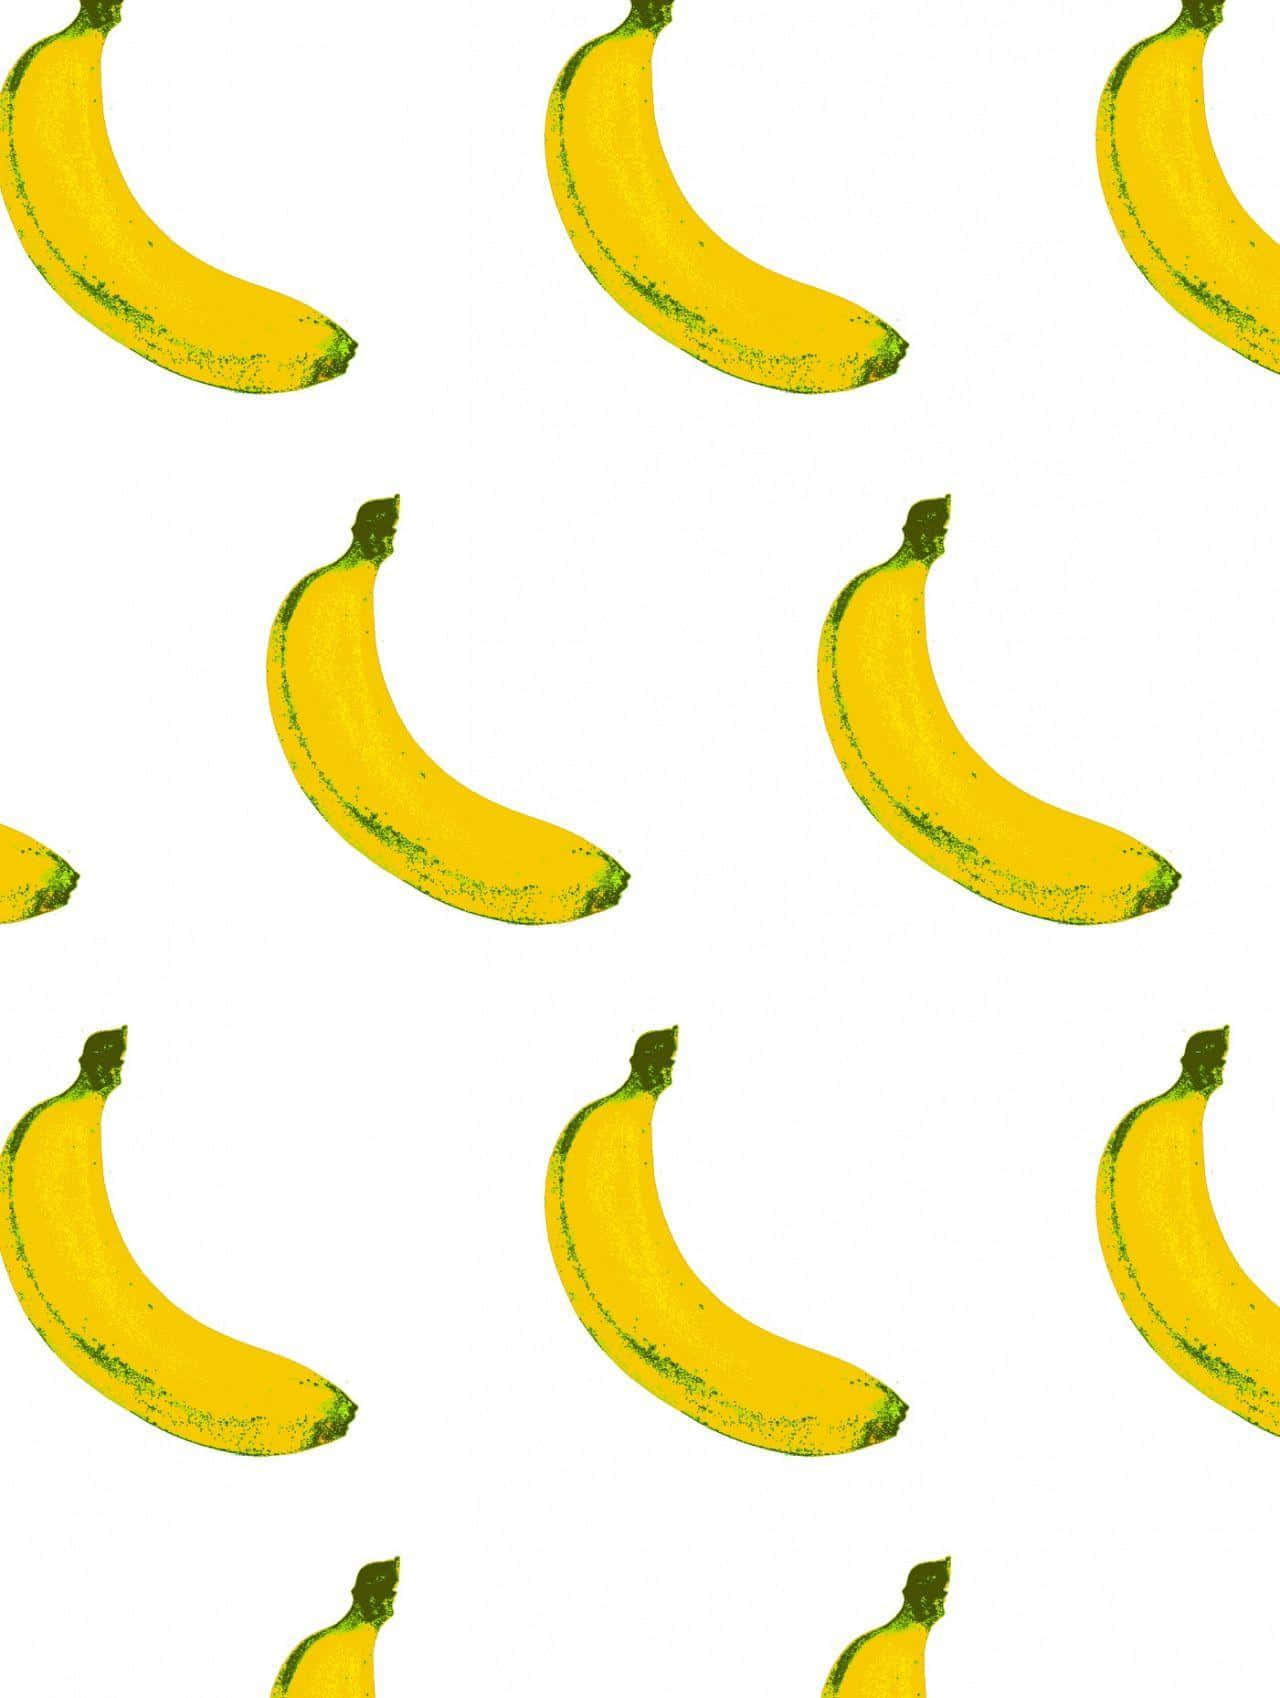 Banana Pictures